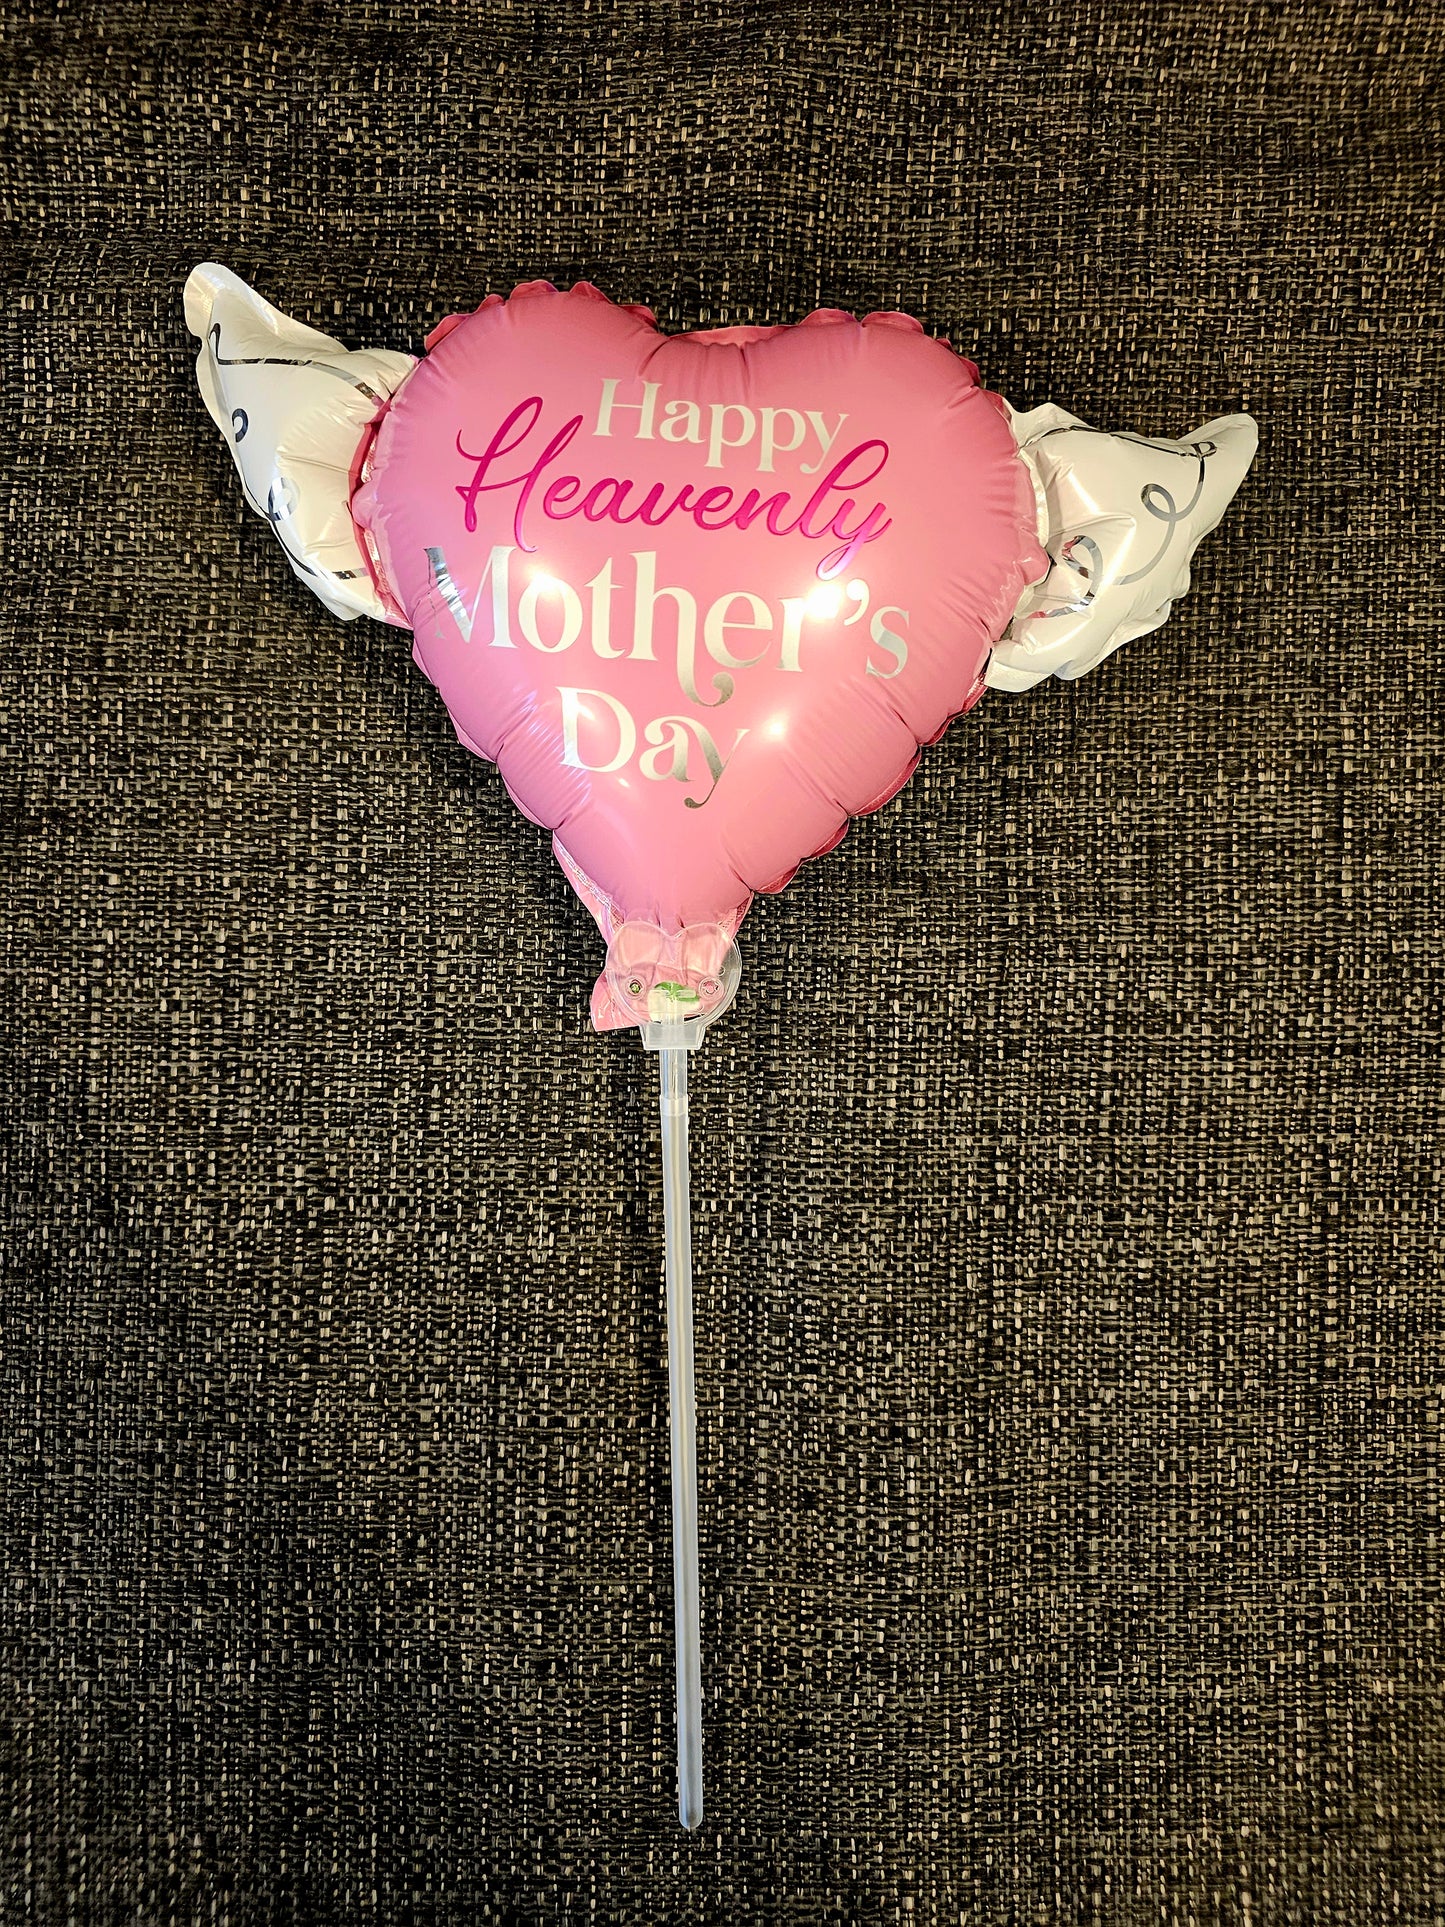 Heavenly Balloons ® on a Stick Happy Heavenly Mother's Day (pink) balloon heart shaped with angel wings